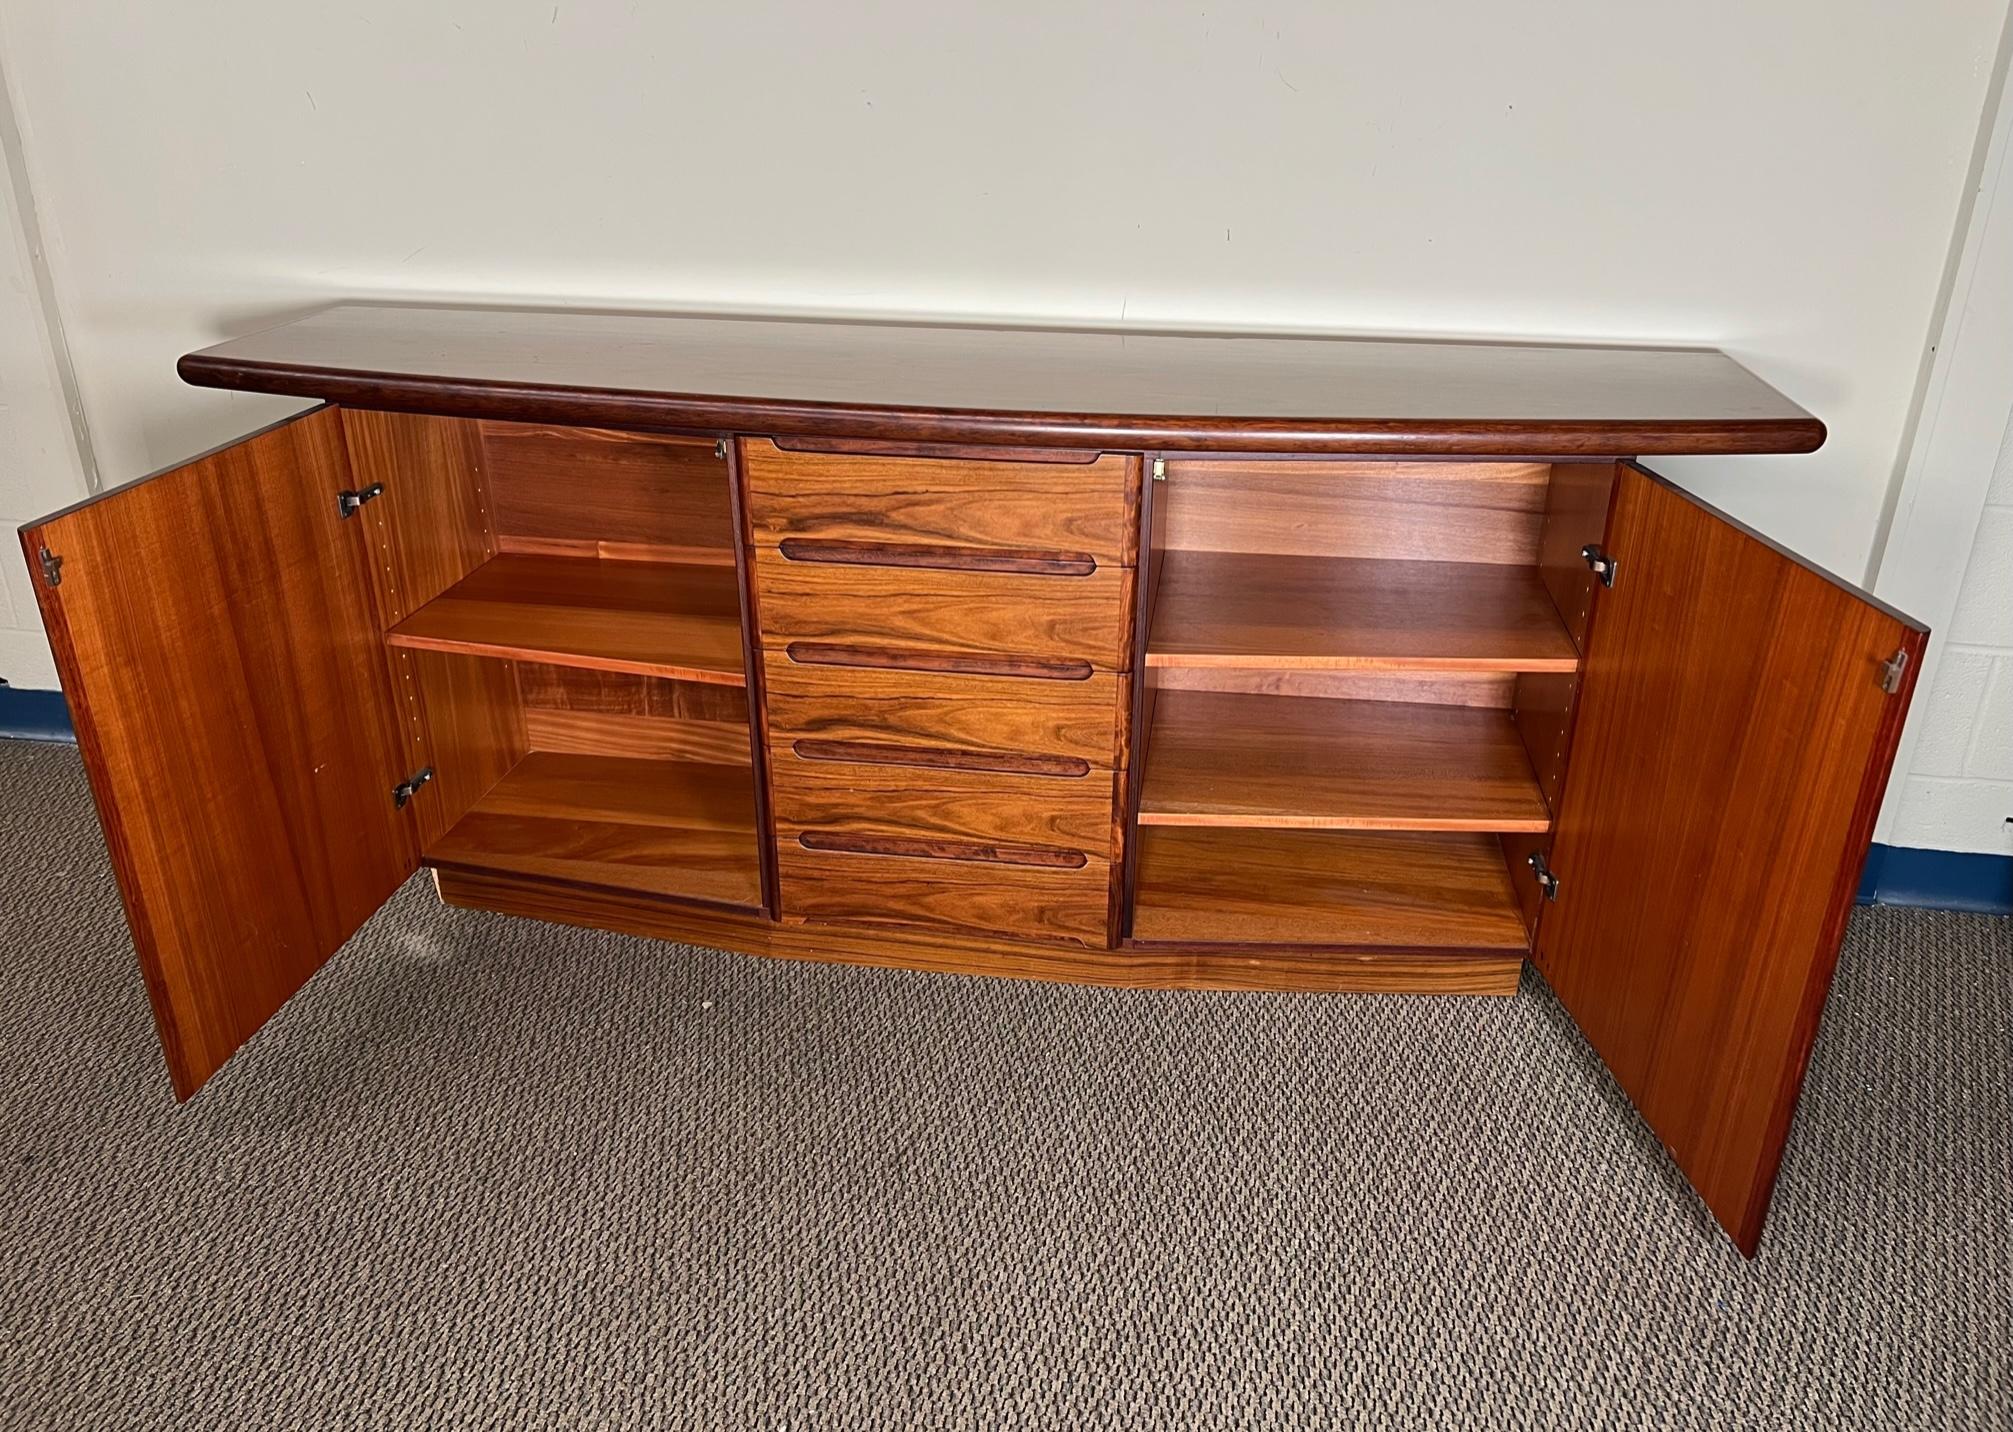 Outstanding rosewood credenza or buffet by Skovby. Lots of storage. Adjustable shelves. Fantastic condition. Clean drawers all open and close well. Some minor marks from normal use. Doors do not stay closed. Latches may need adjusting.
Dimensions: